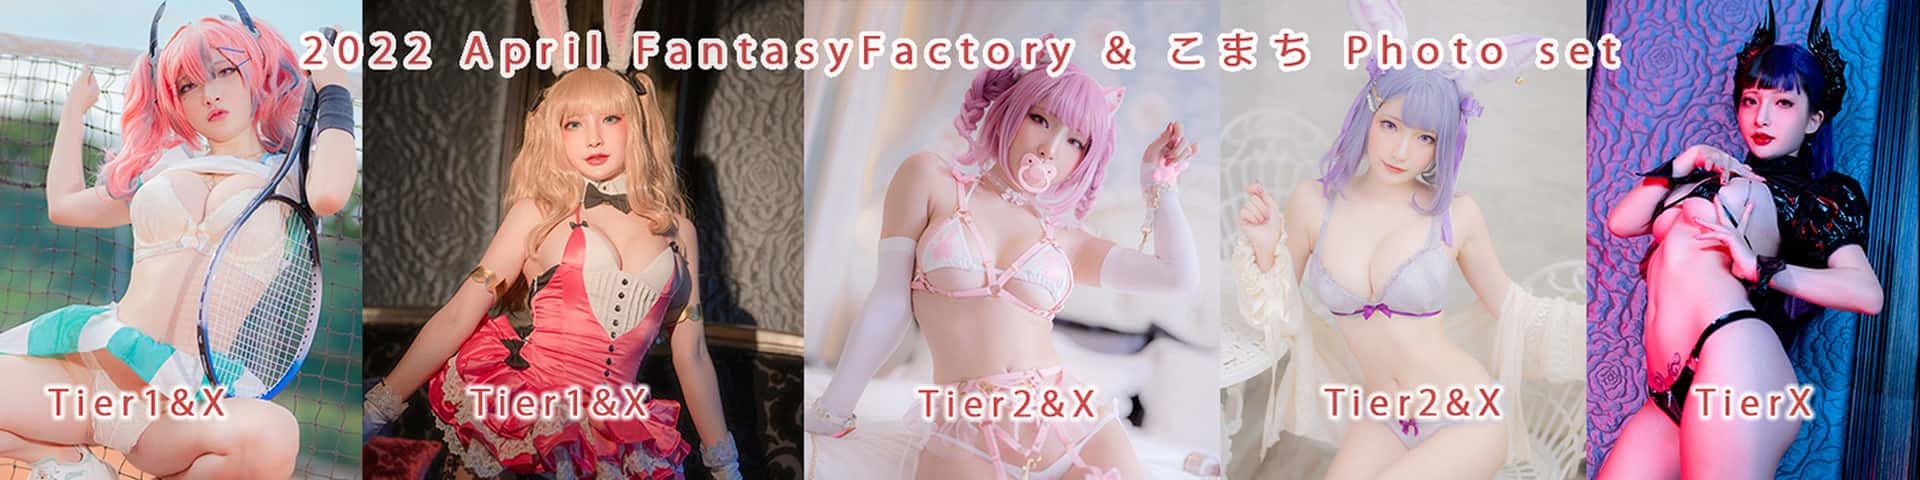 Fantasy Factory Xiaoding - March 1, 2022